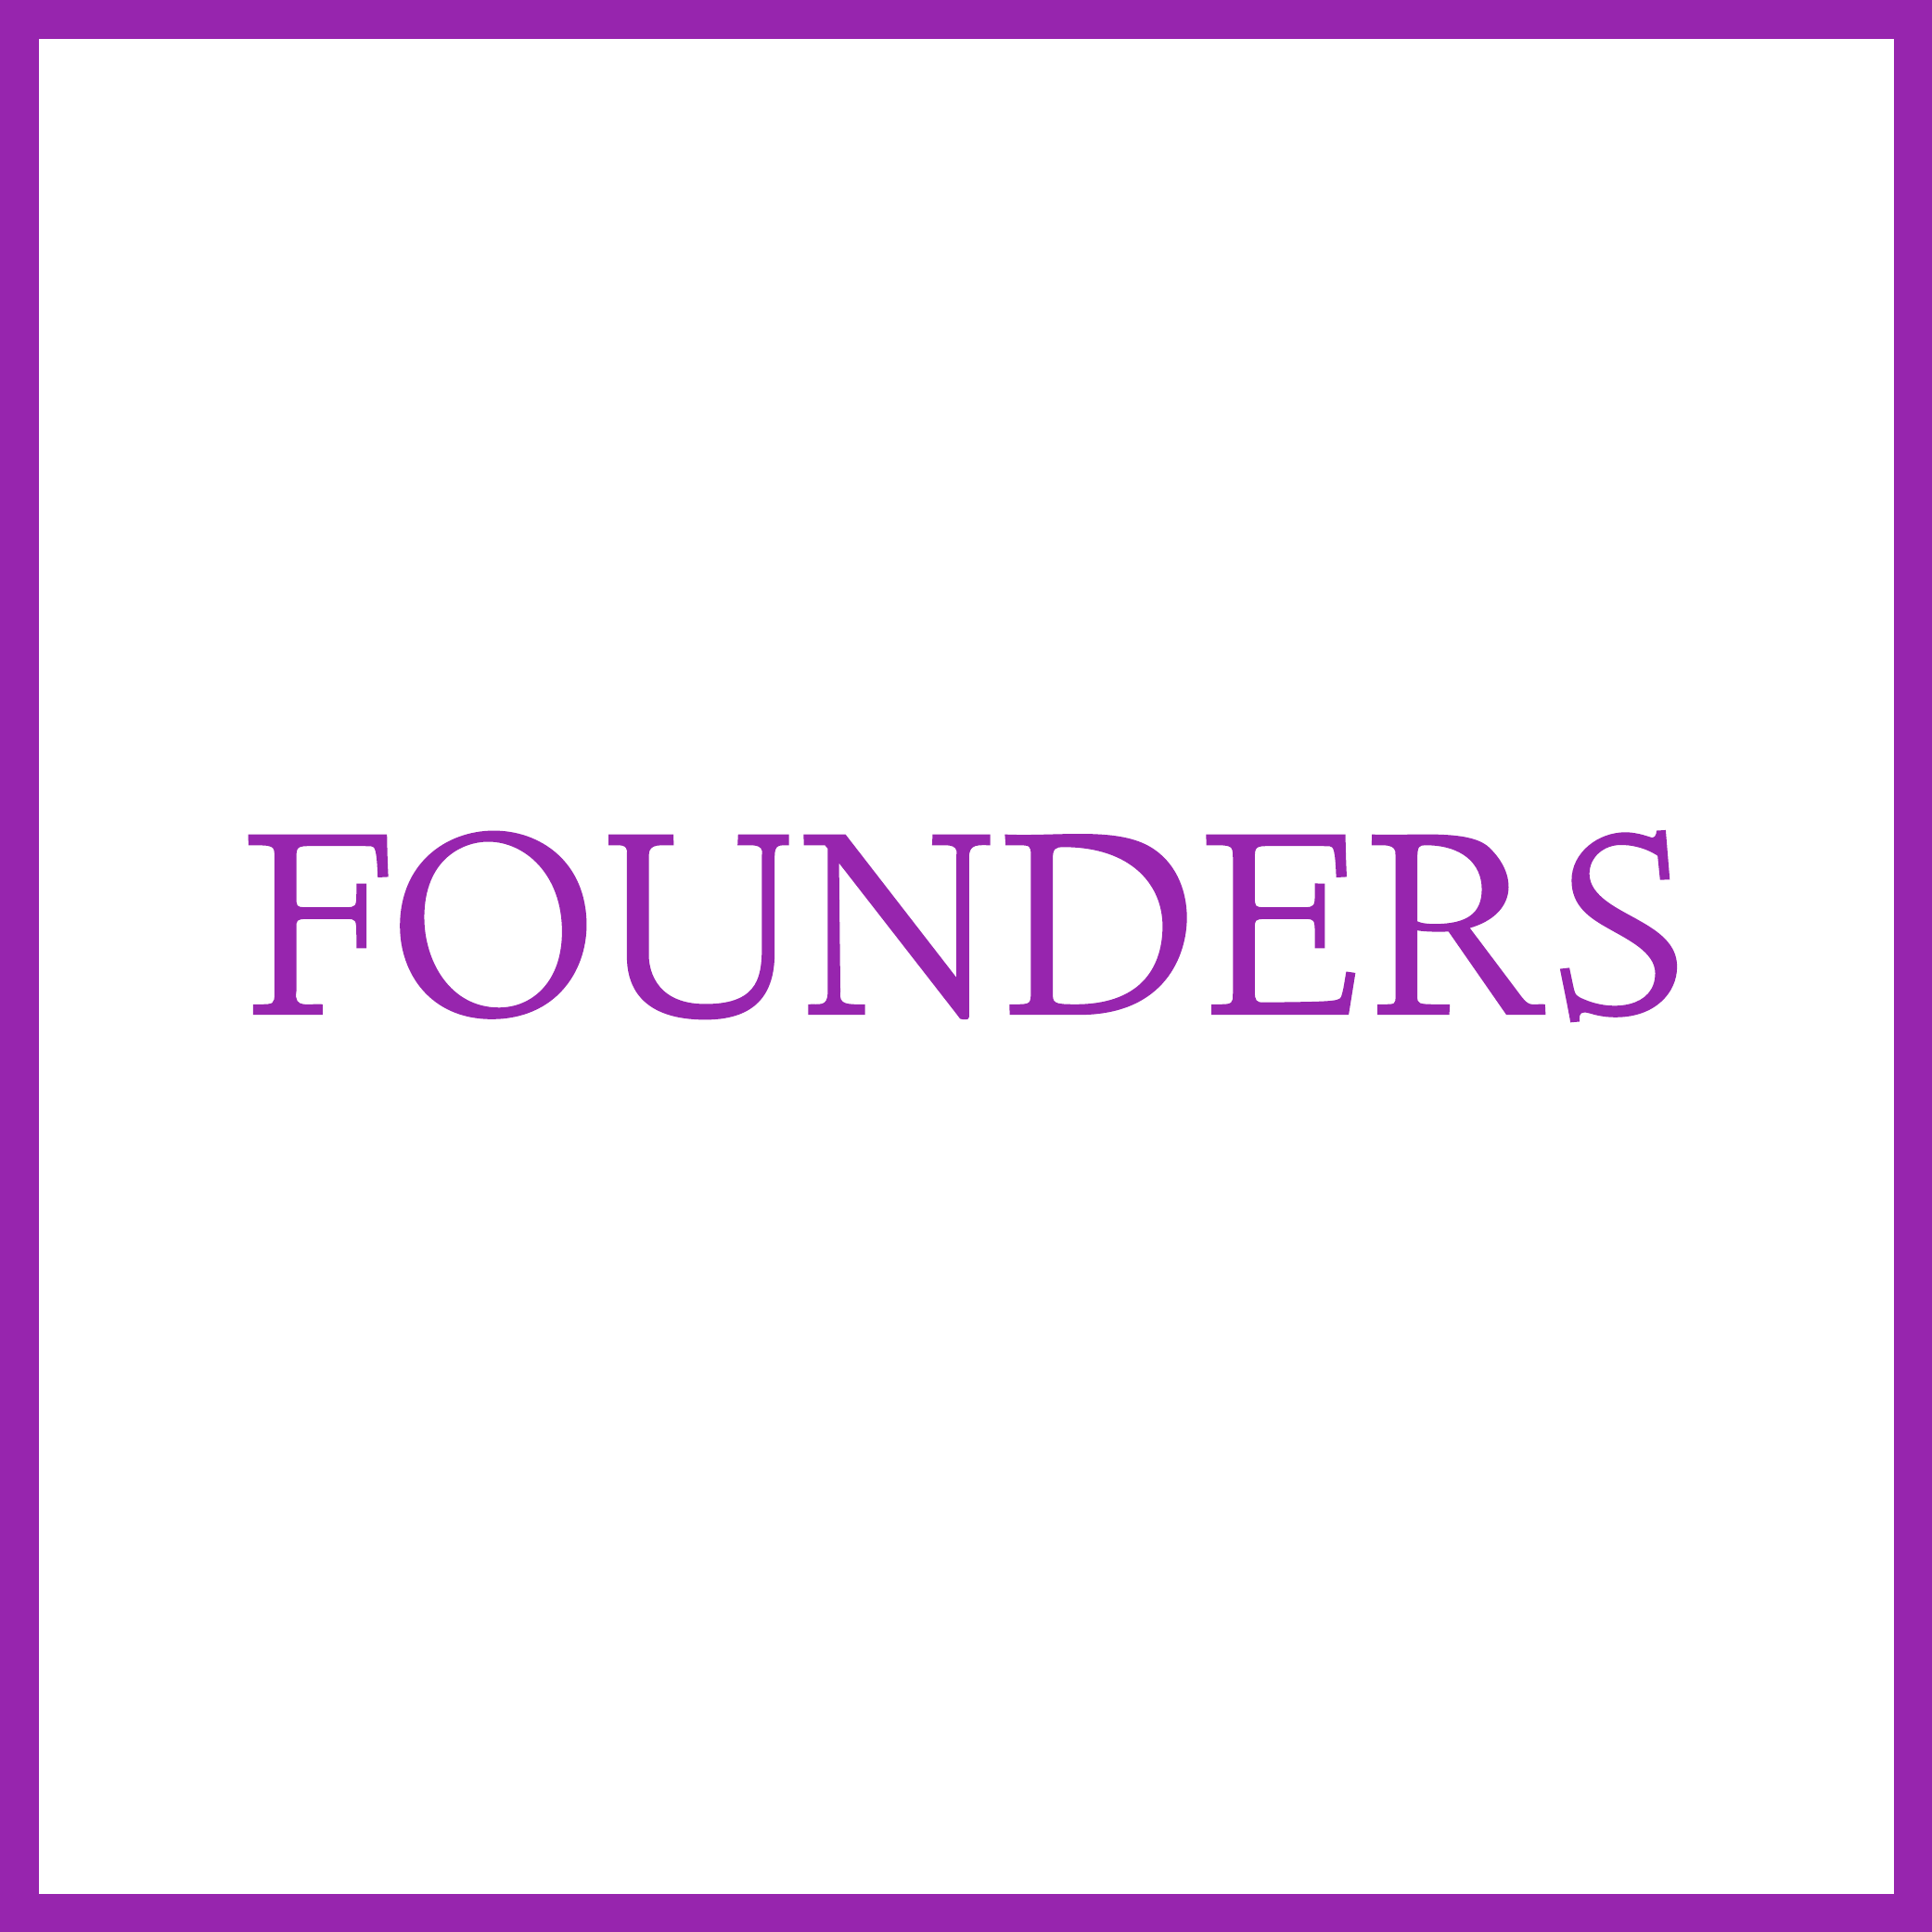 FOUNDERS (1).png